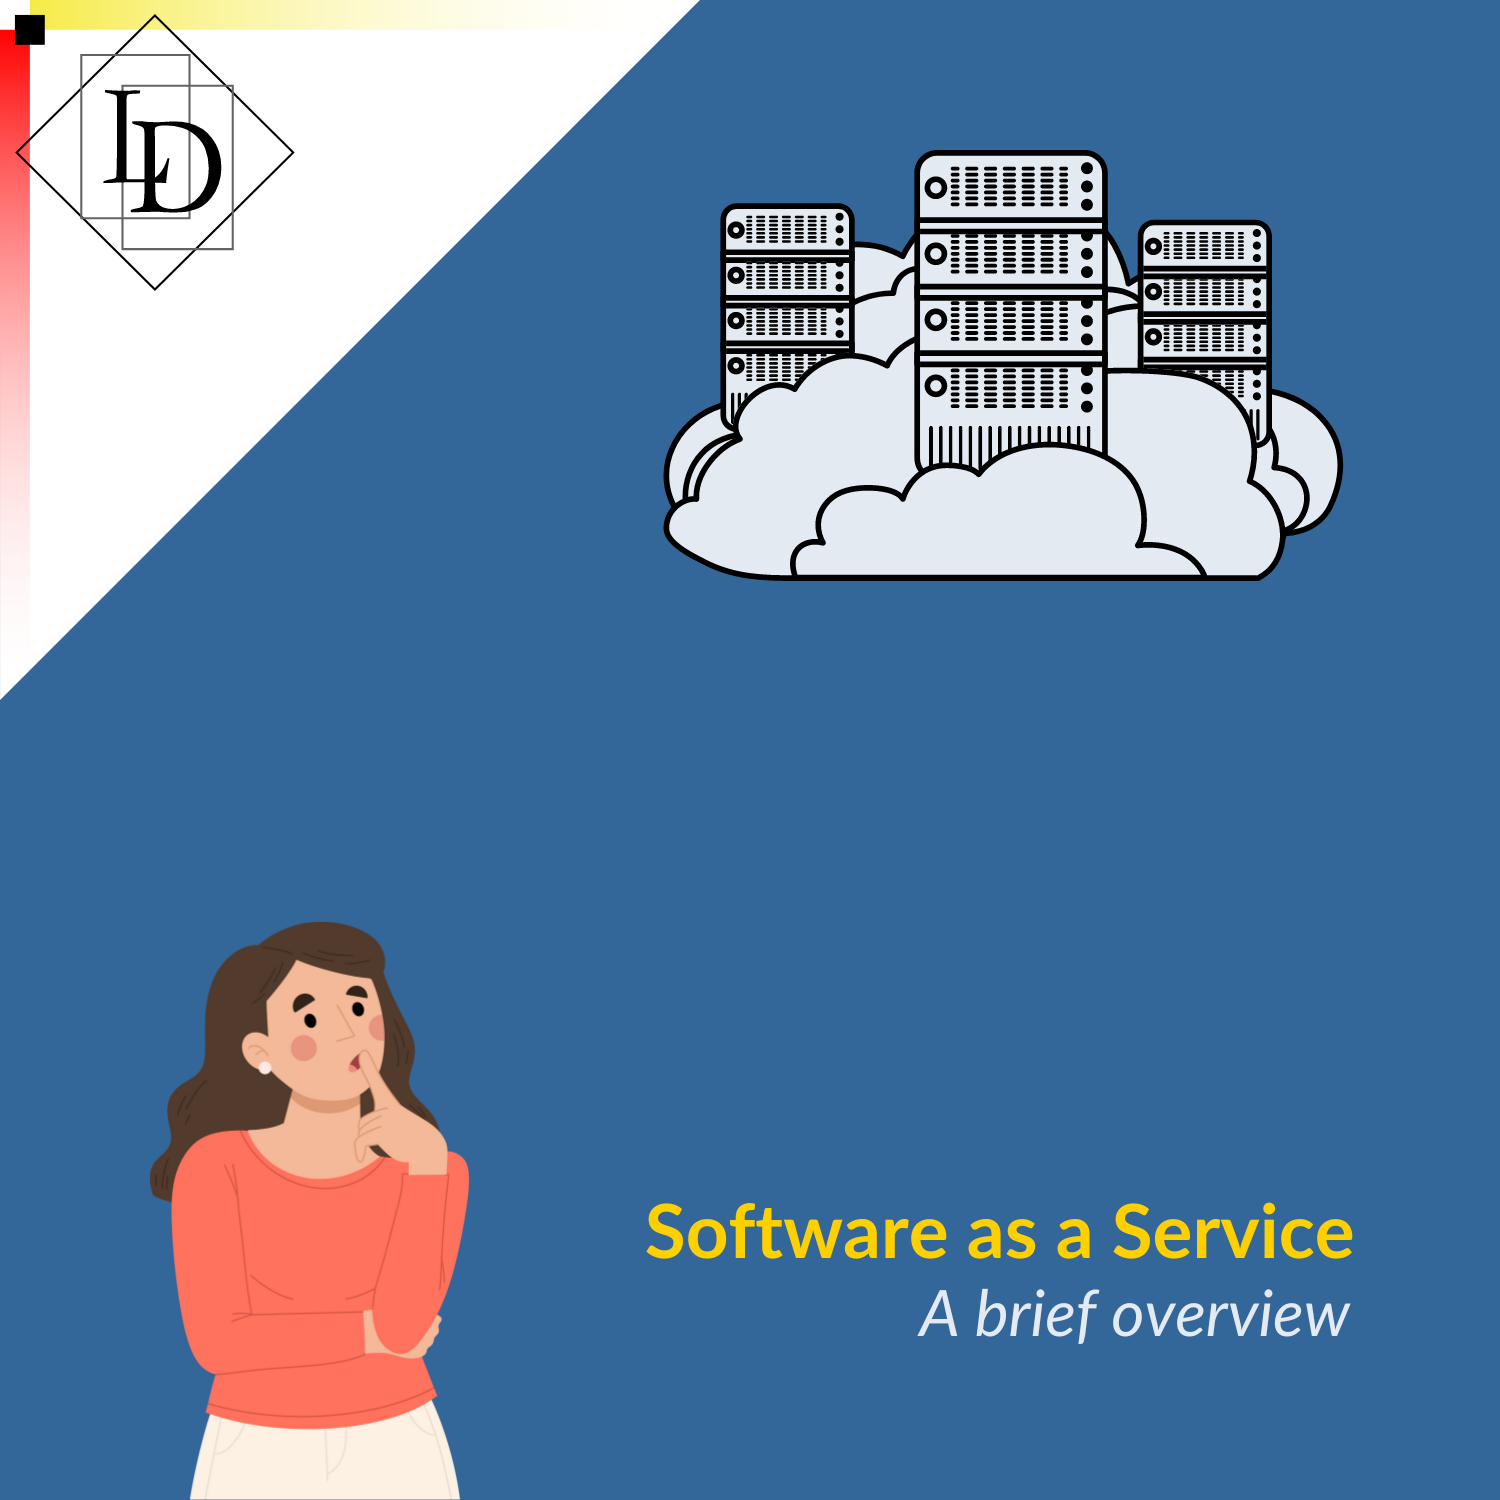 The image depicts a woman in thought, considering a representation of cloud computing.